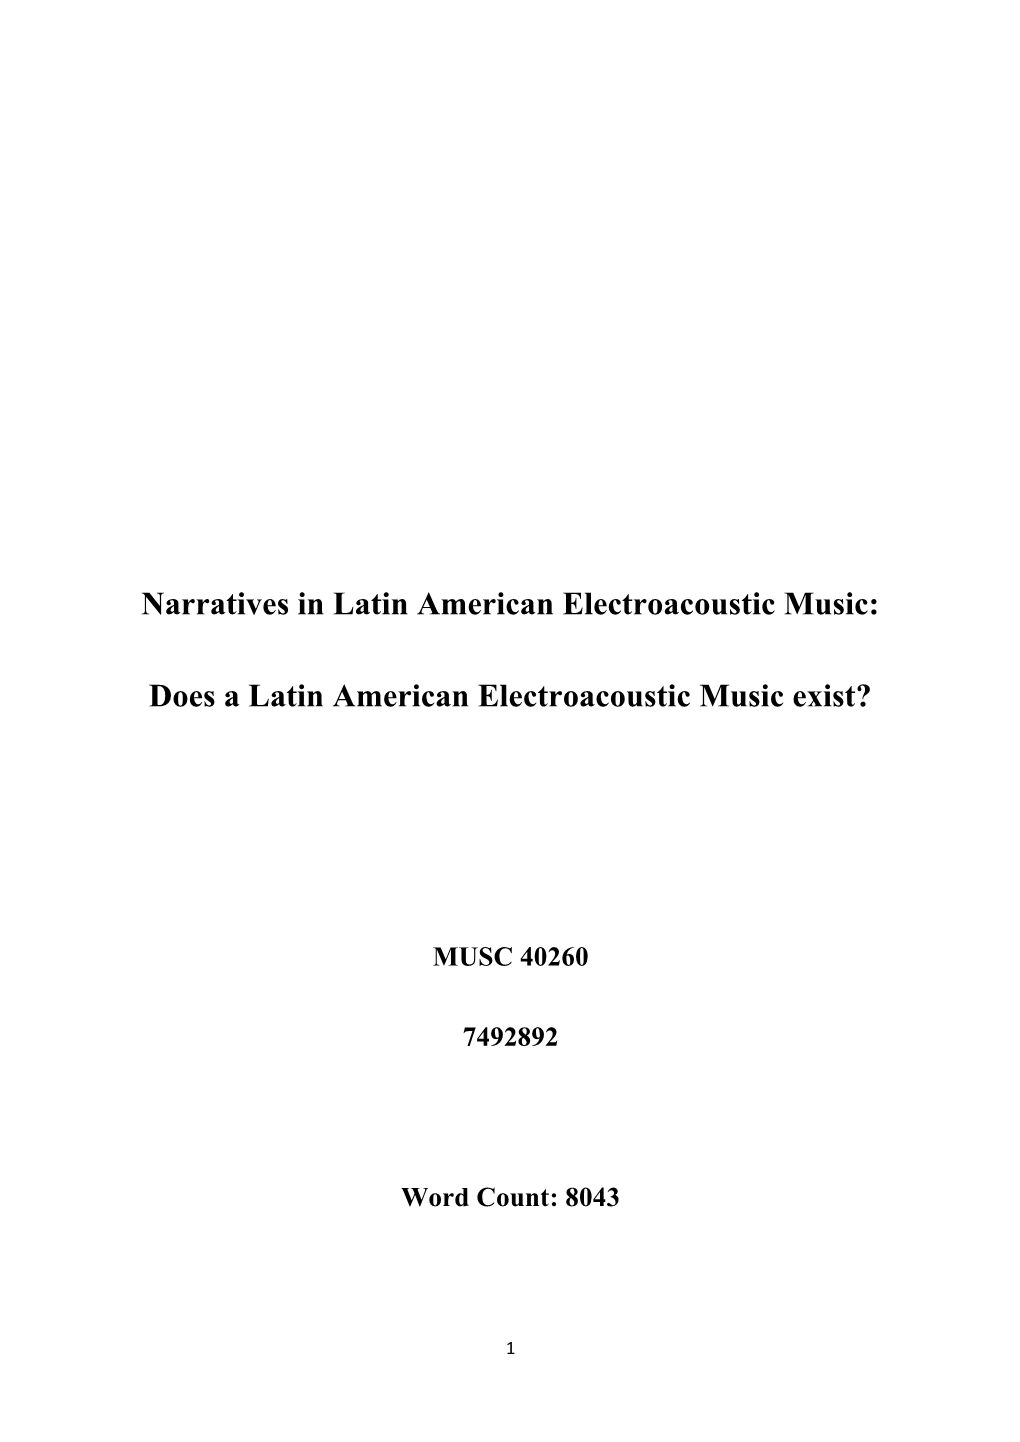 Narratives in Latin American Electroacoustic Music: Does a Latin